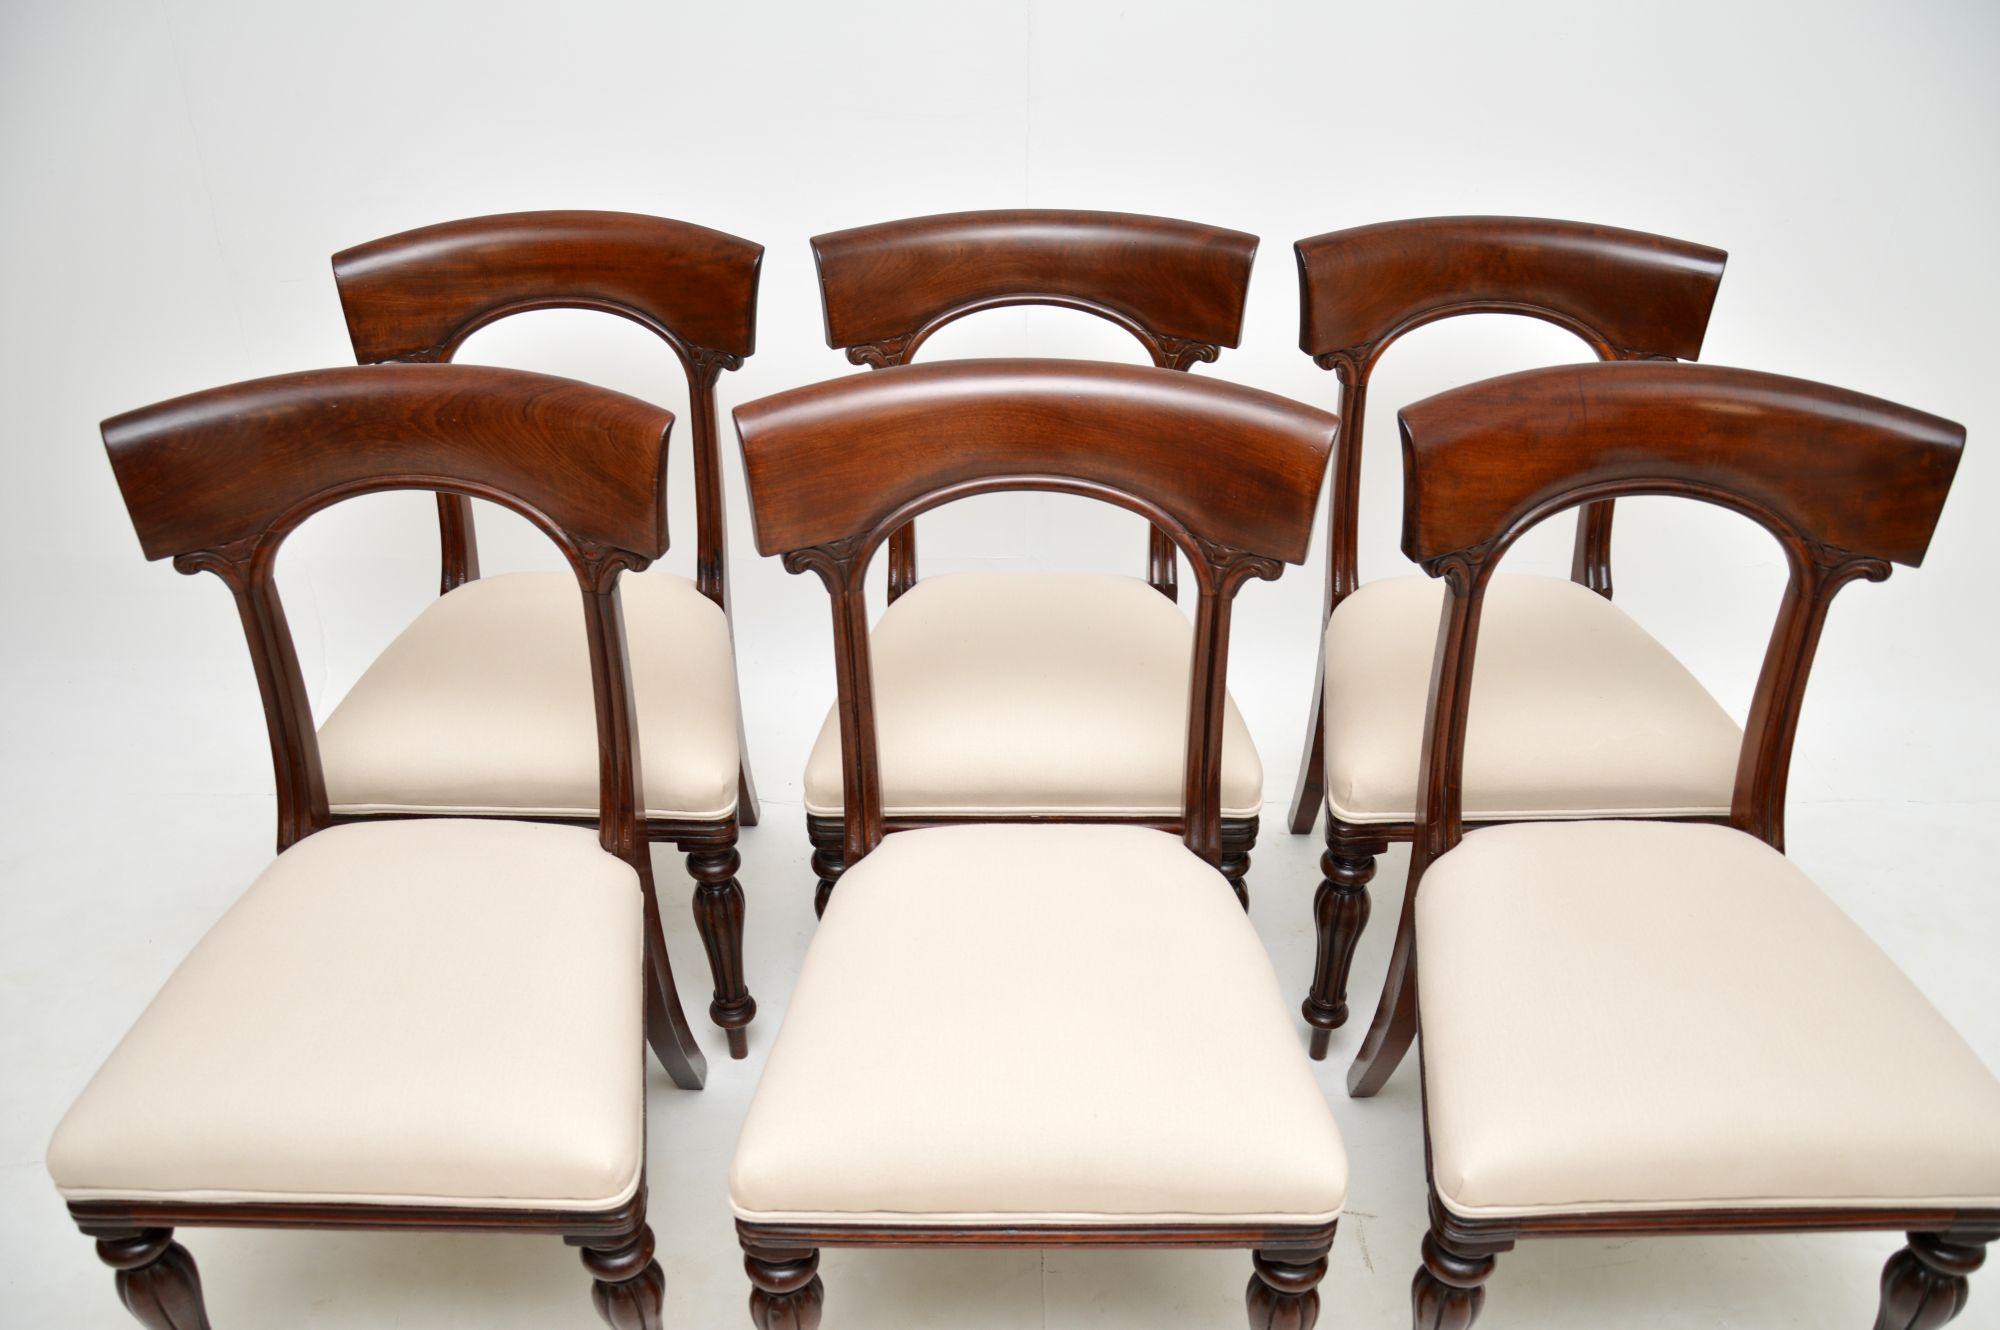 English Set of 6 Antique William IV Dining Chairs